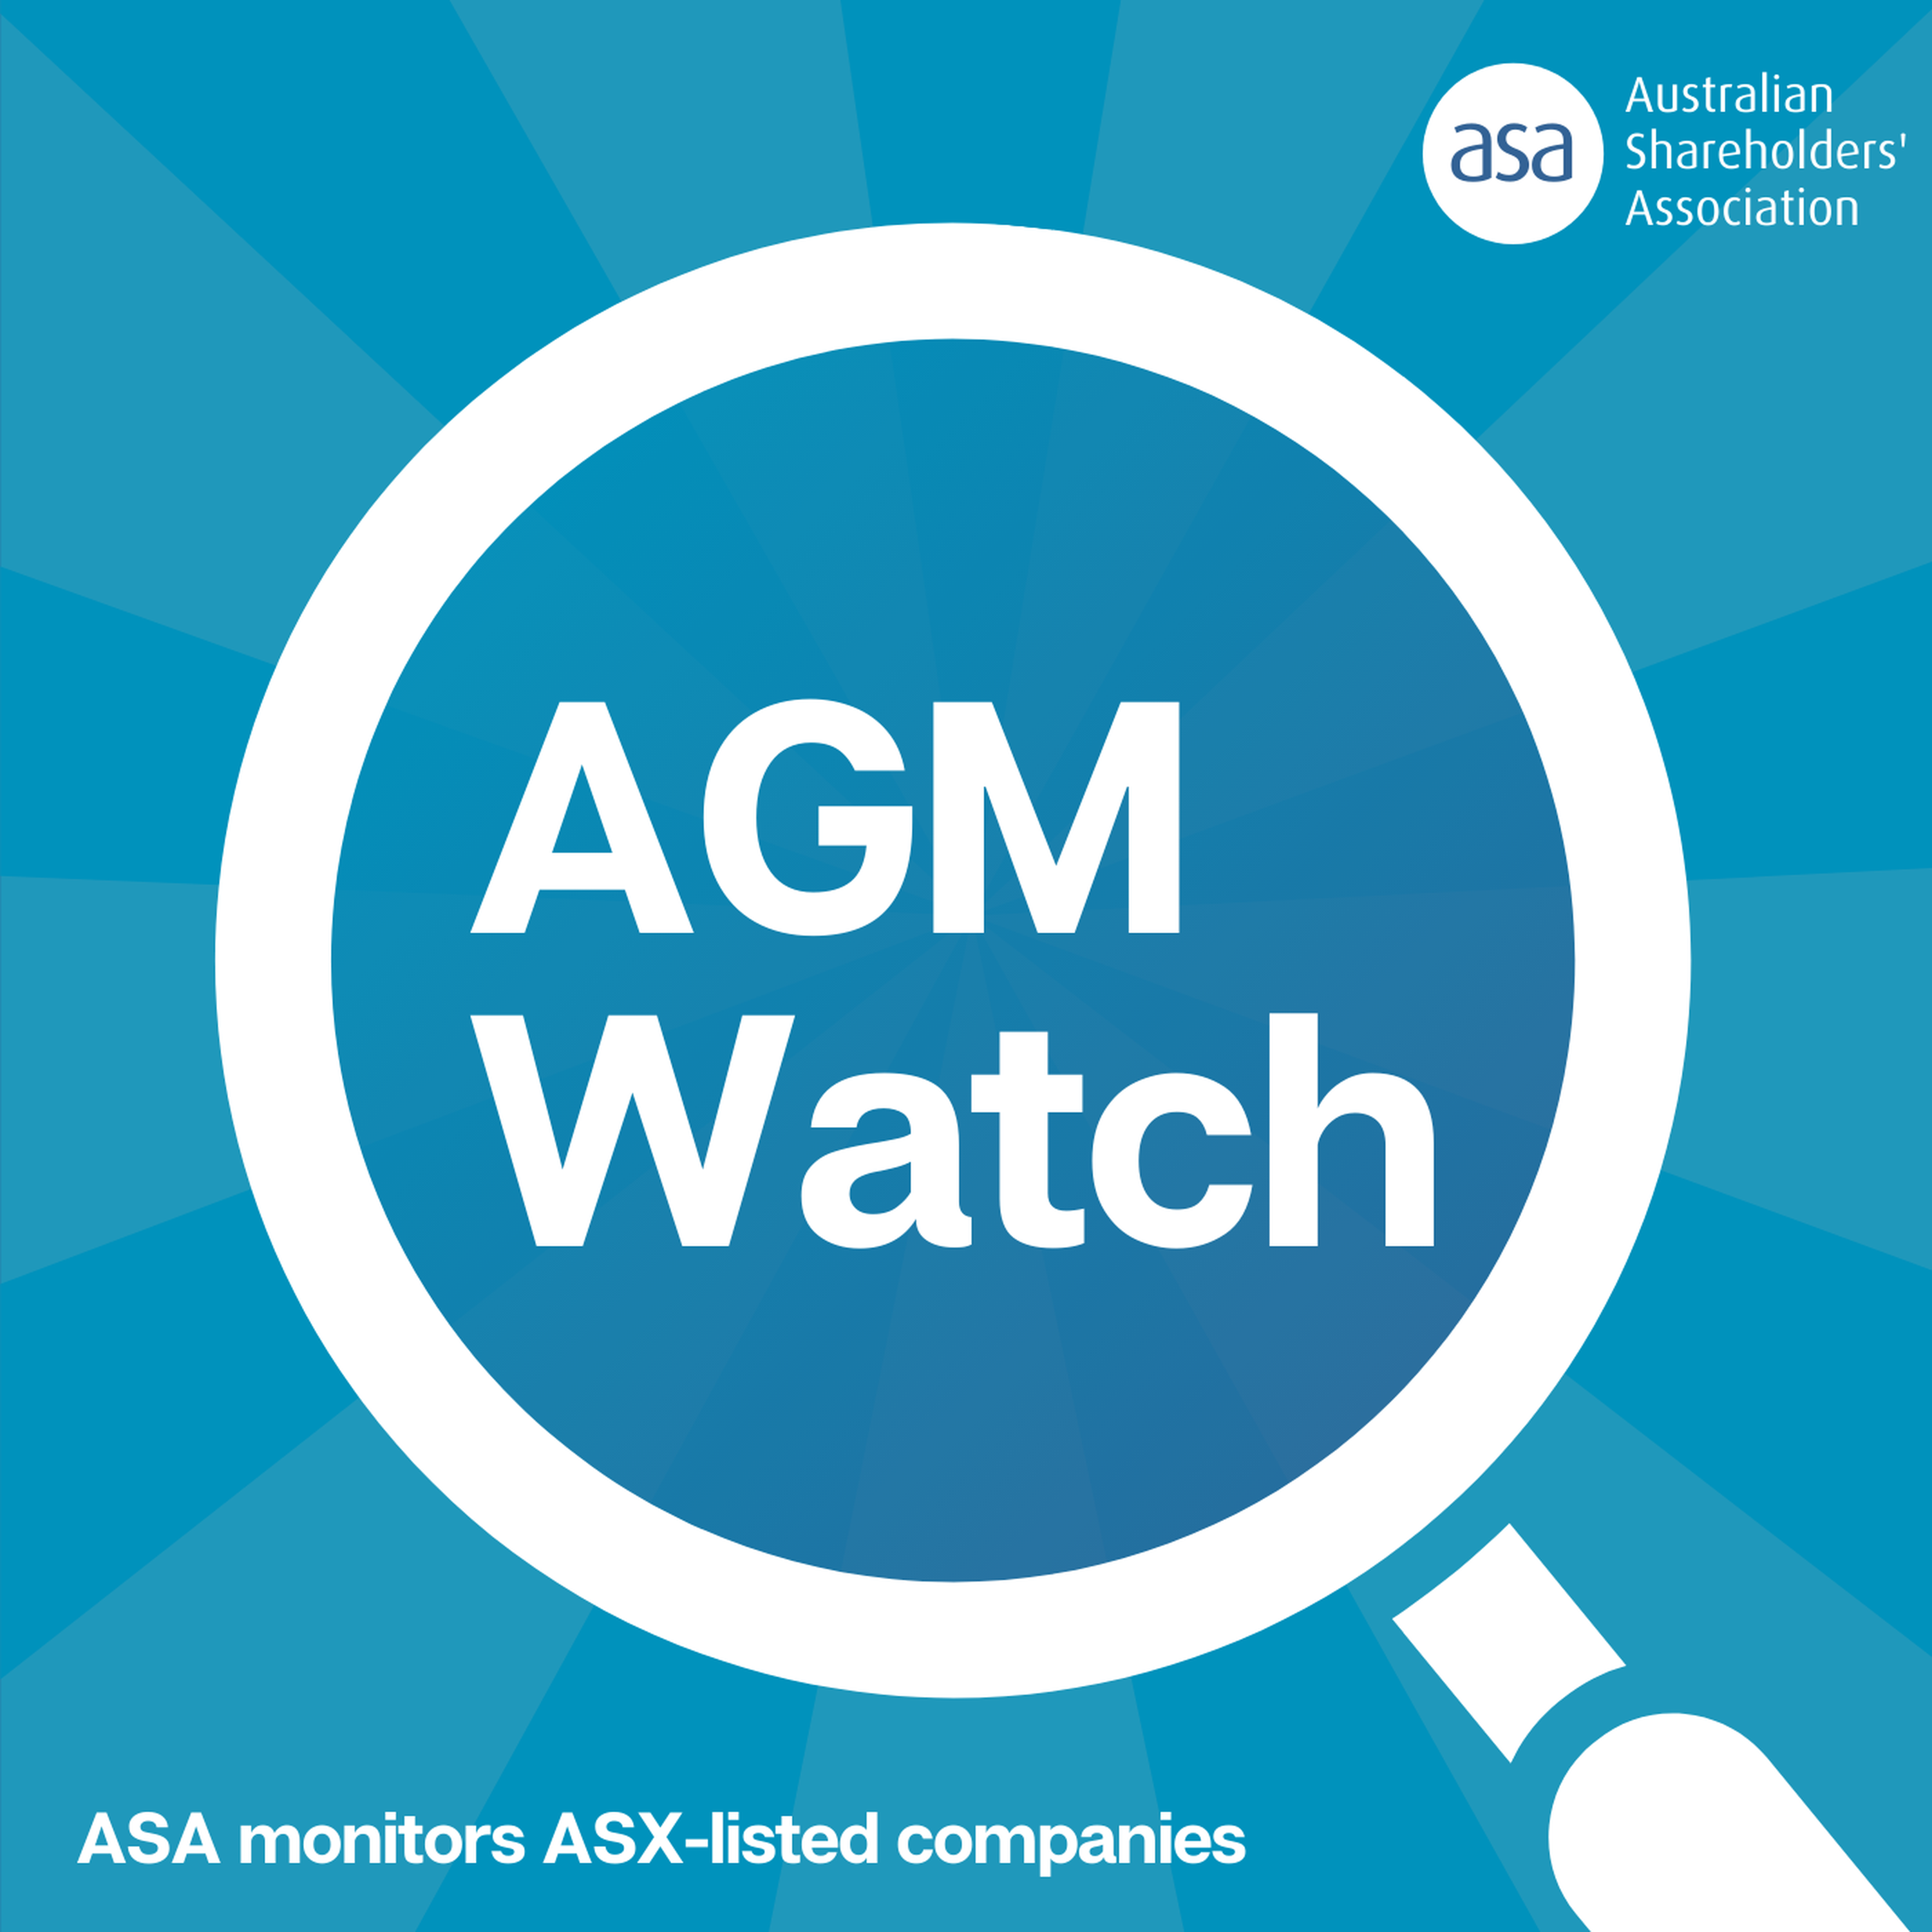 AGM Watch - Commonwealth Bank